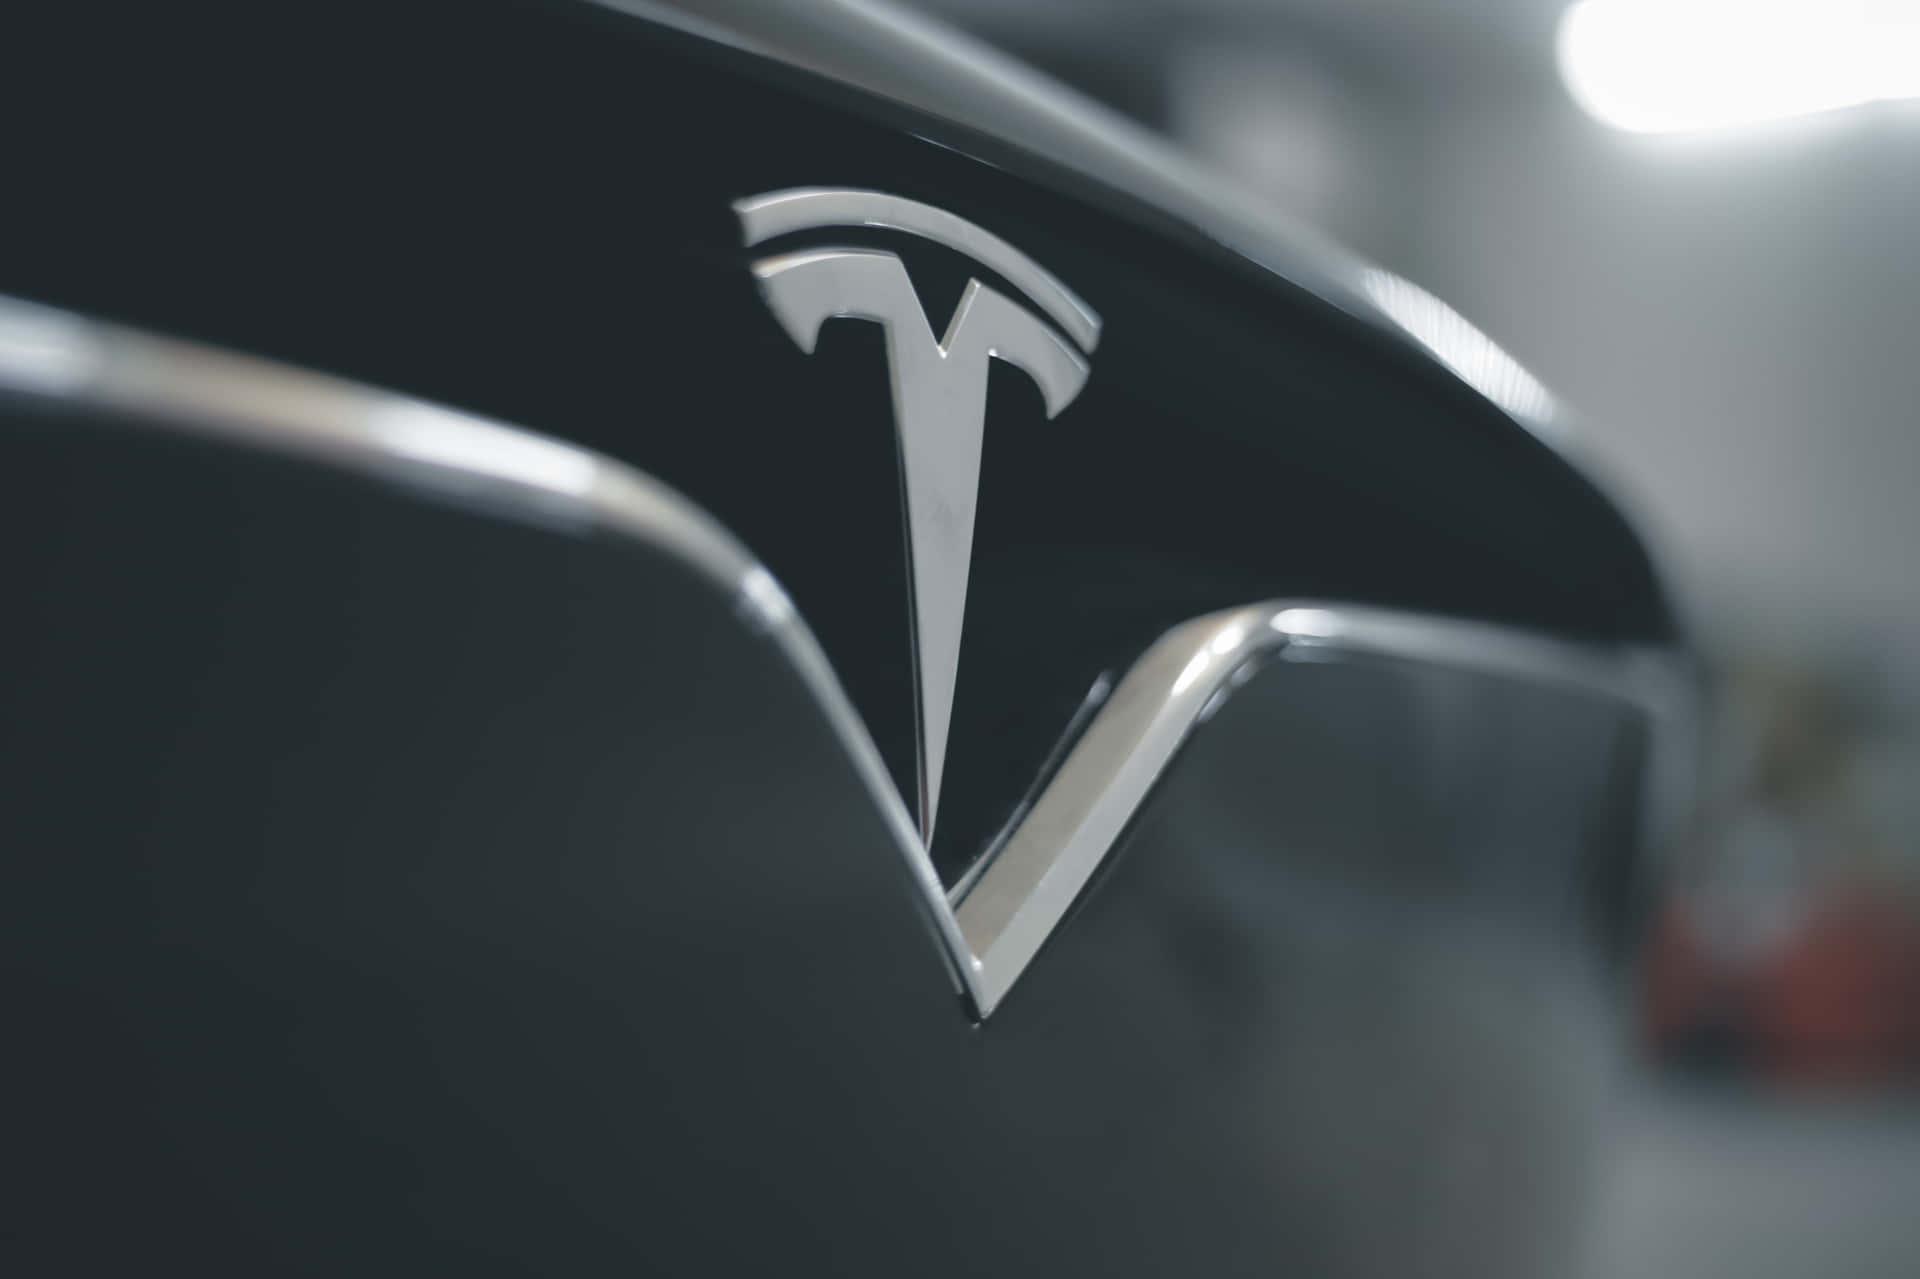 Download Logo of the technological automobile company Tesla in 4k